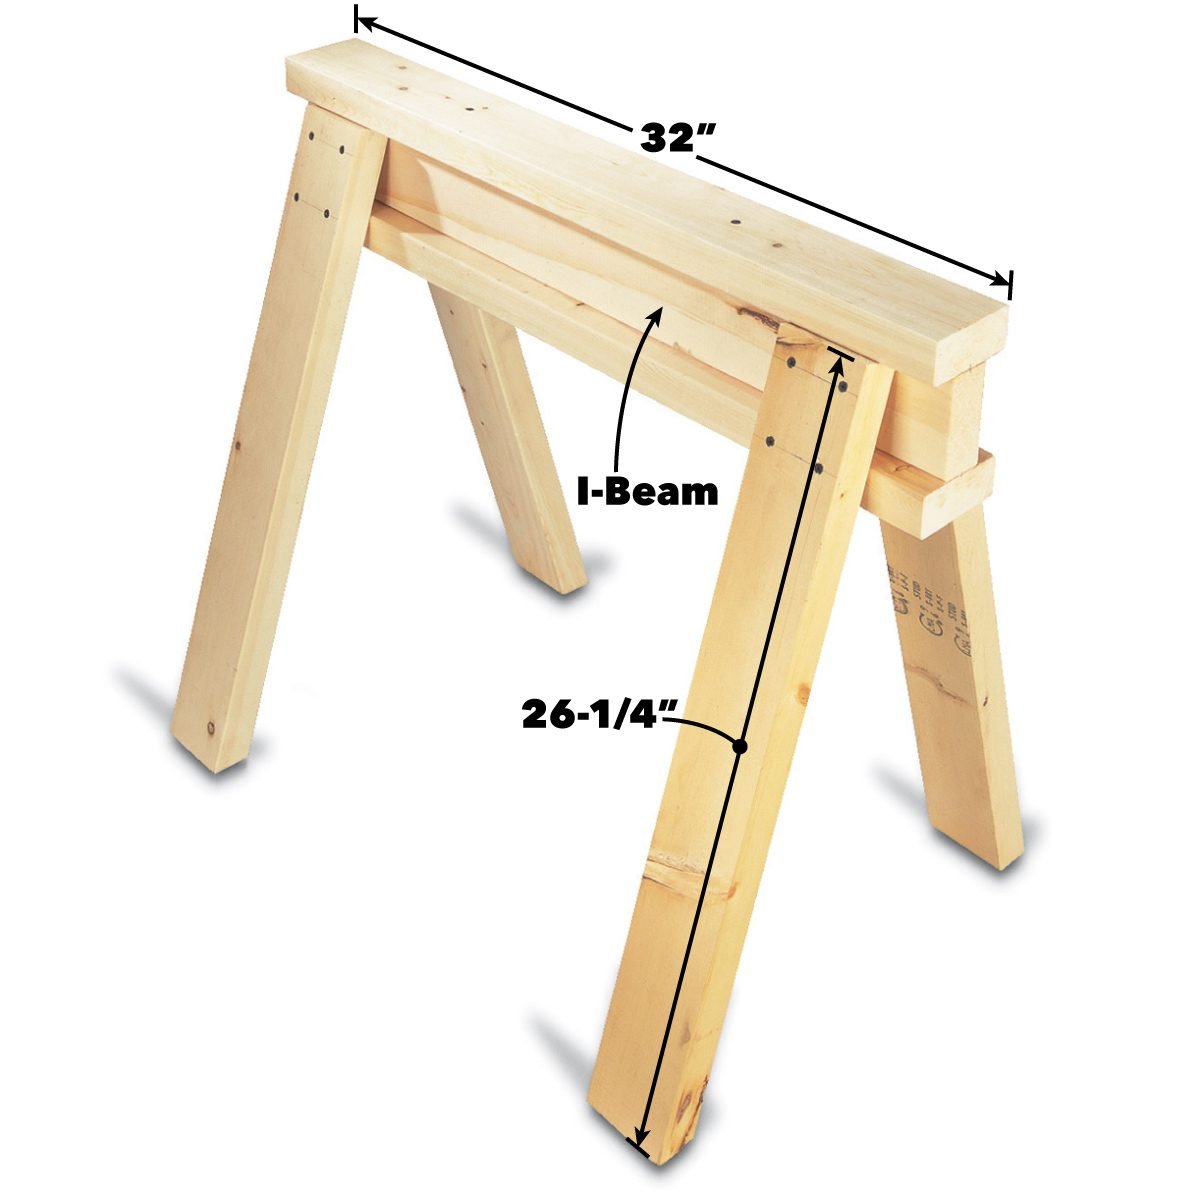 FH01OCT_02453_005-1200 sawhorse tips